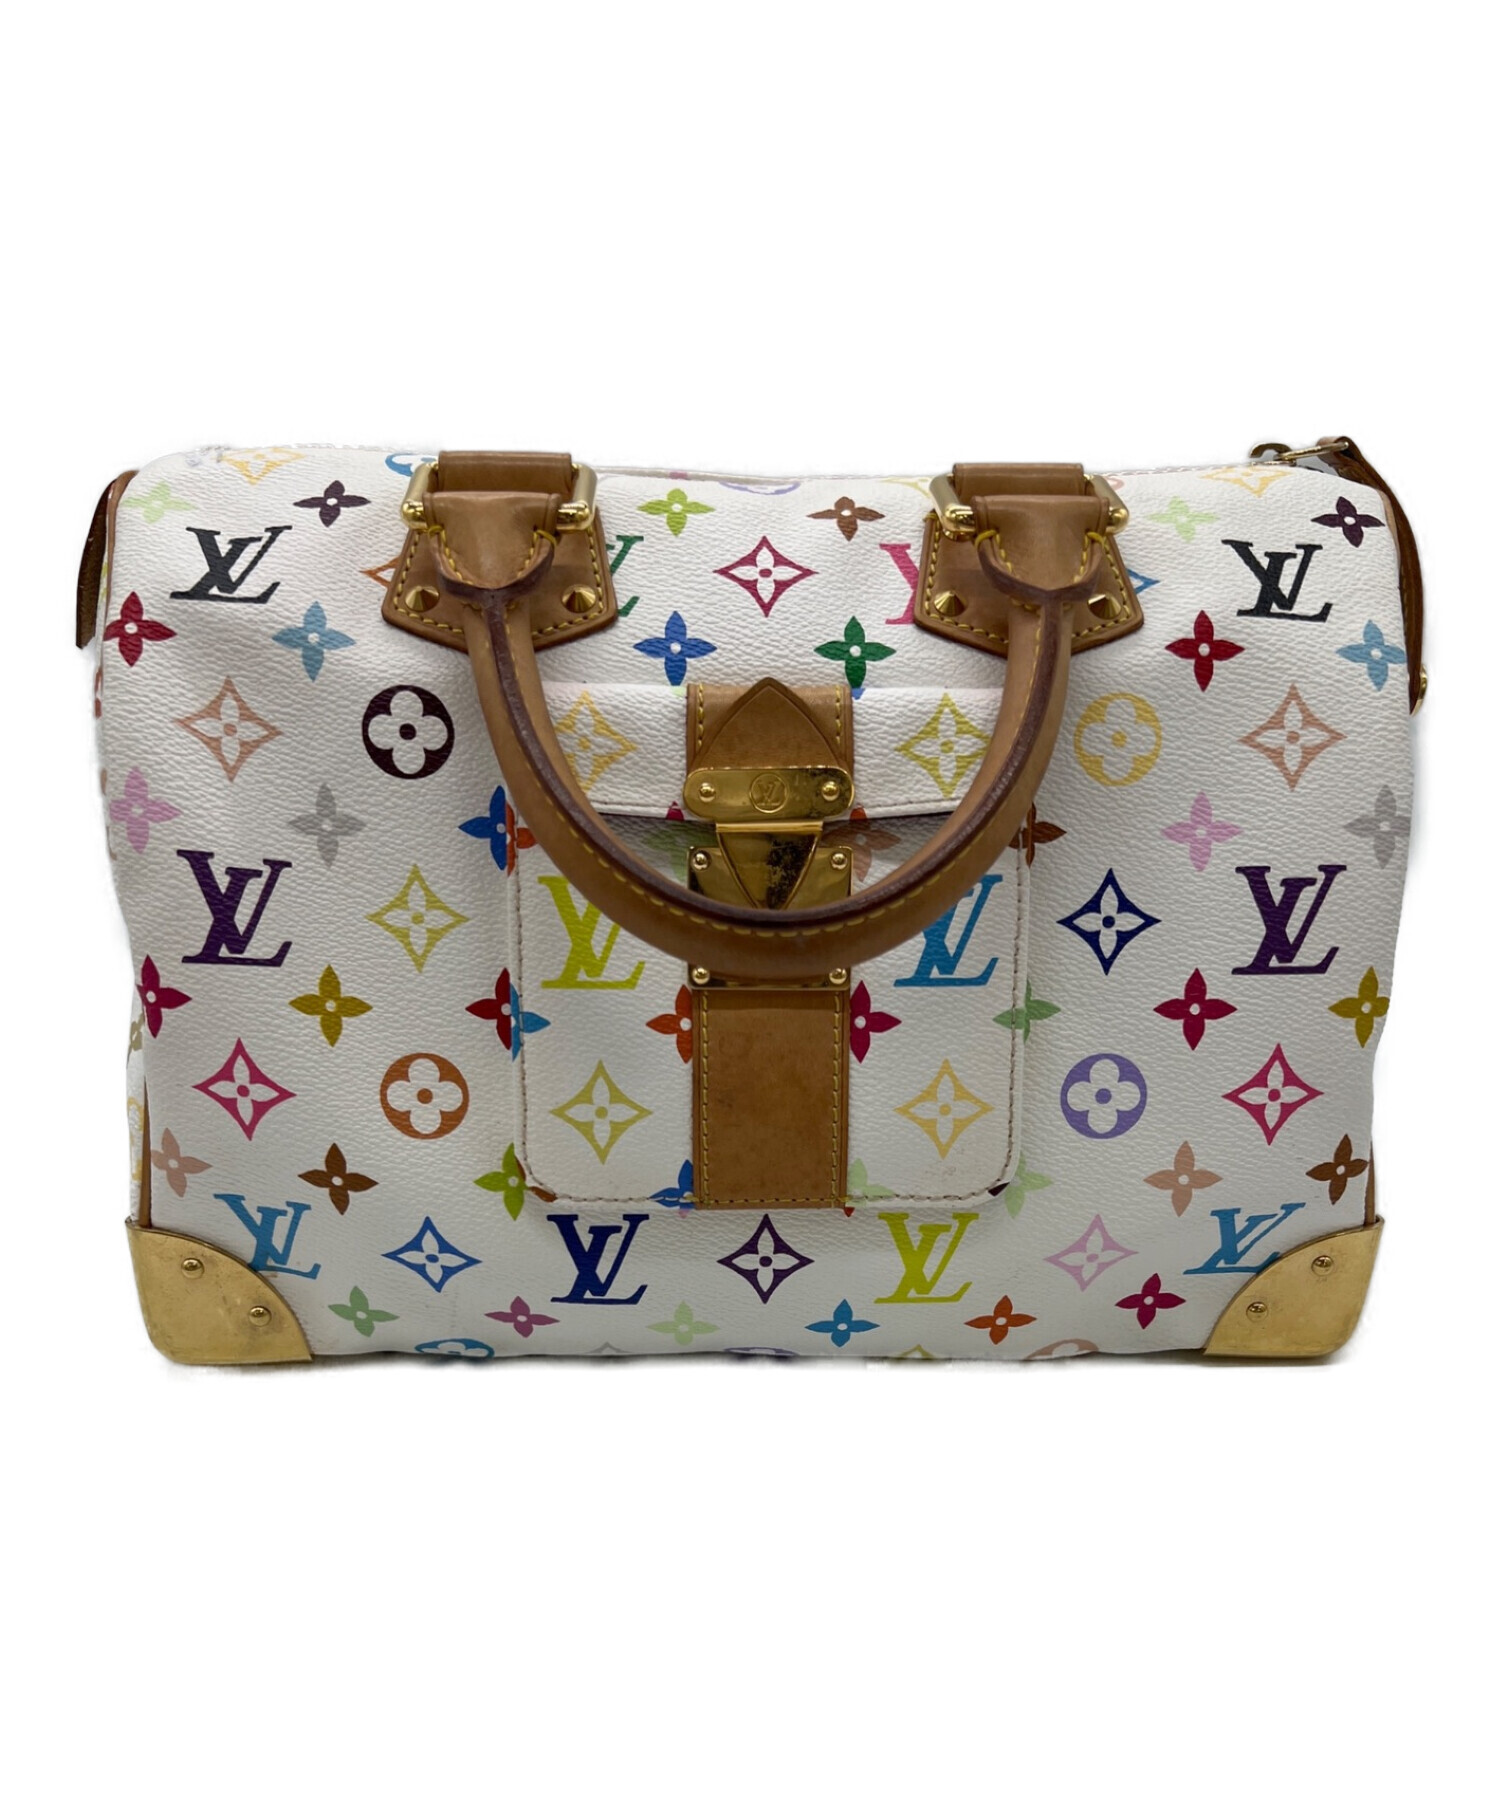 ✦LOUIS VUITTON✦ルイヴィトン✦スピーディ30✦USED✦